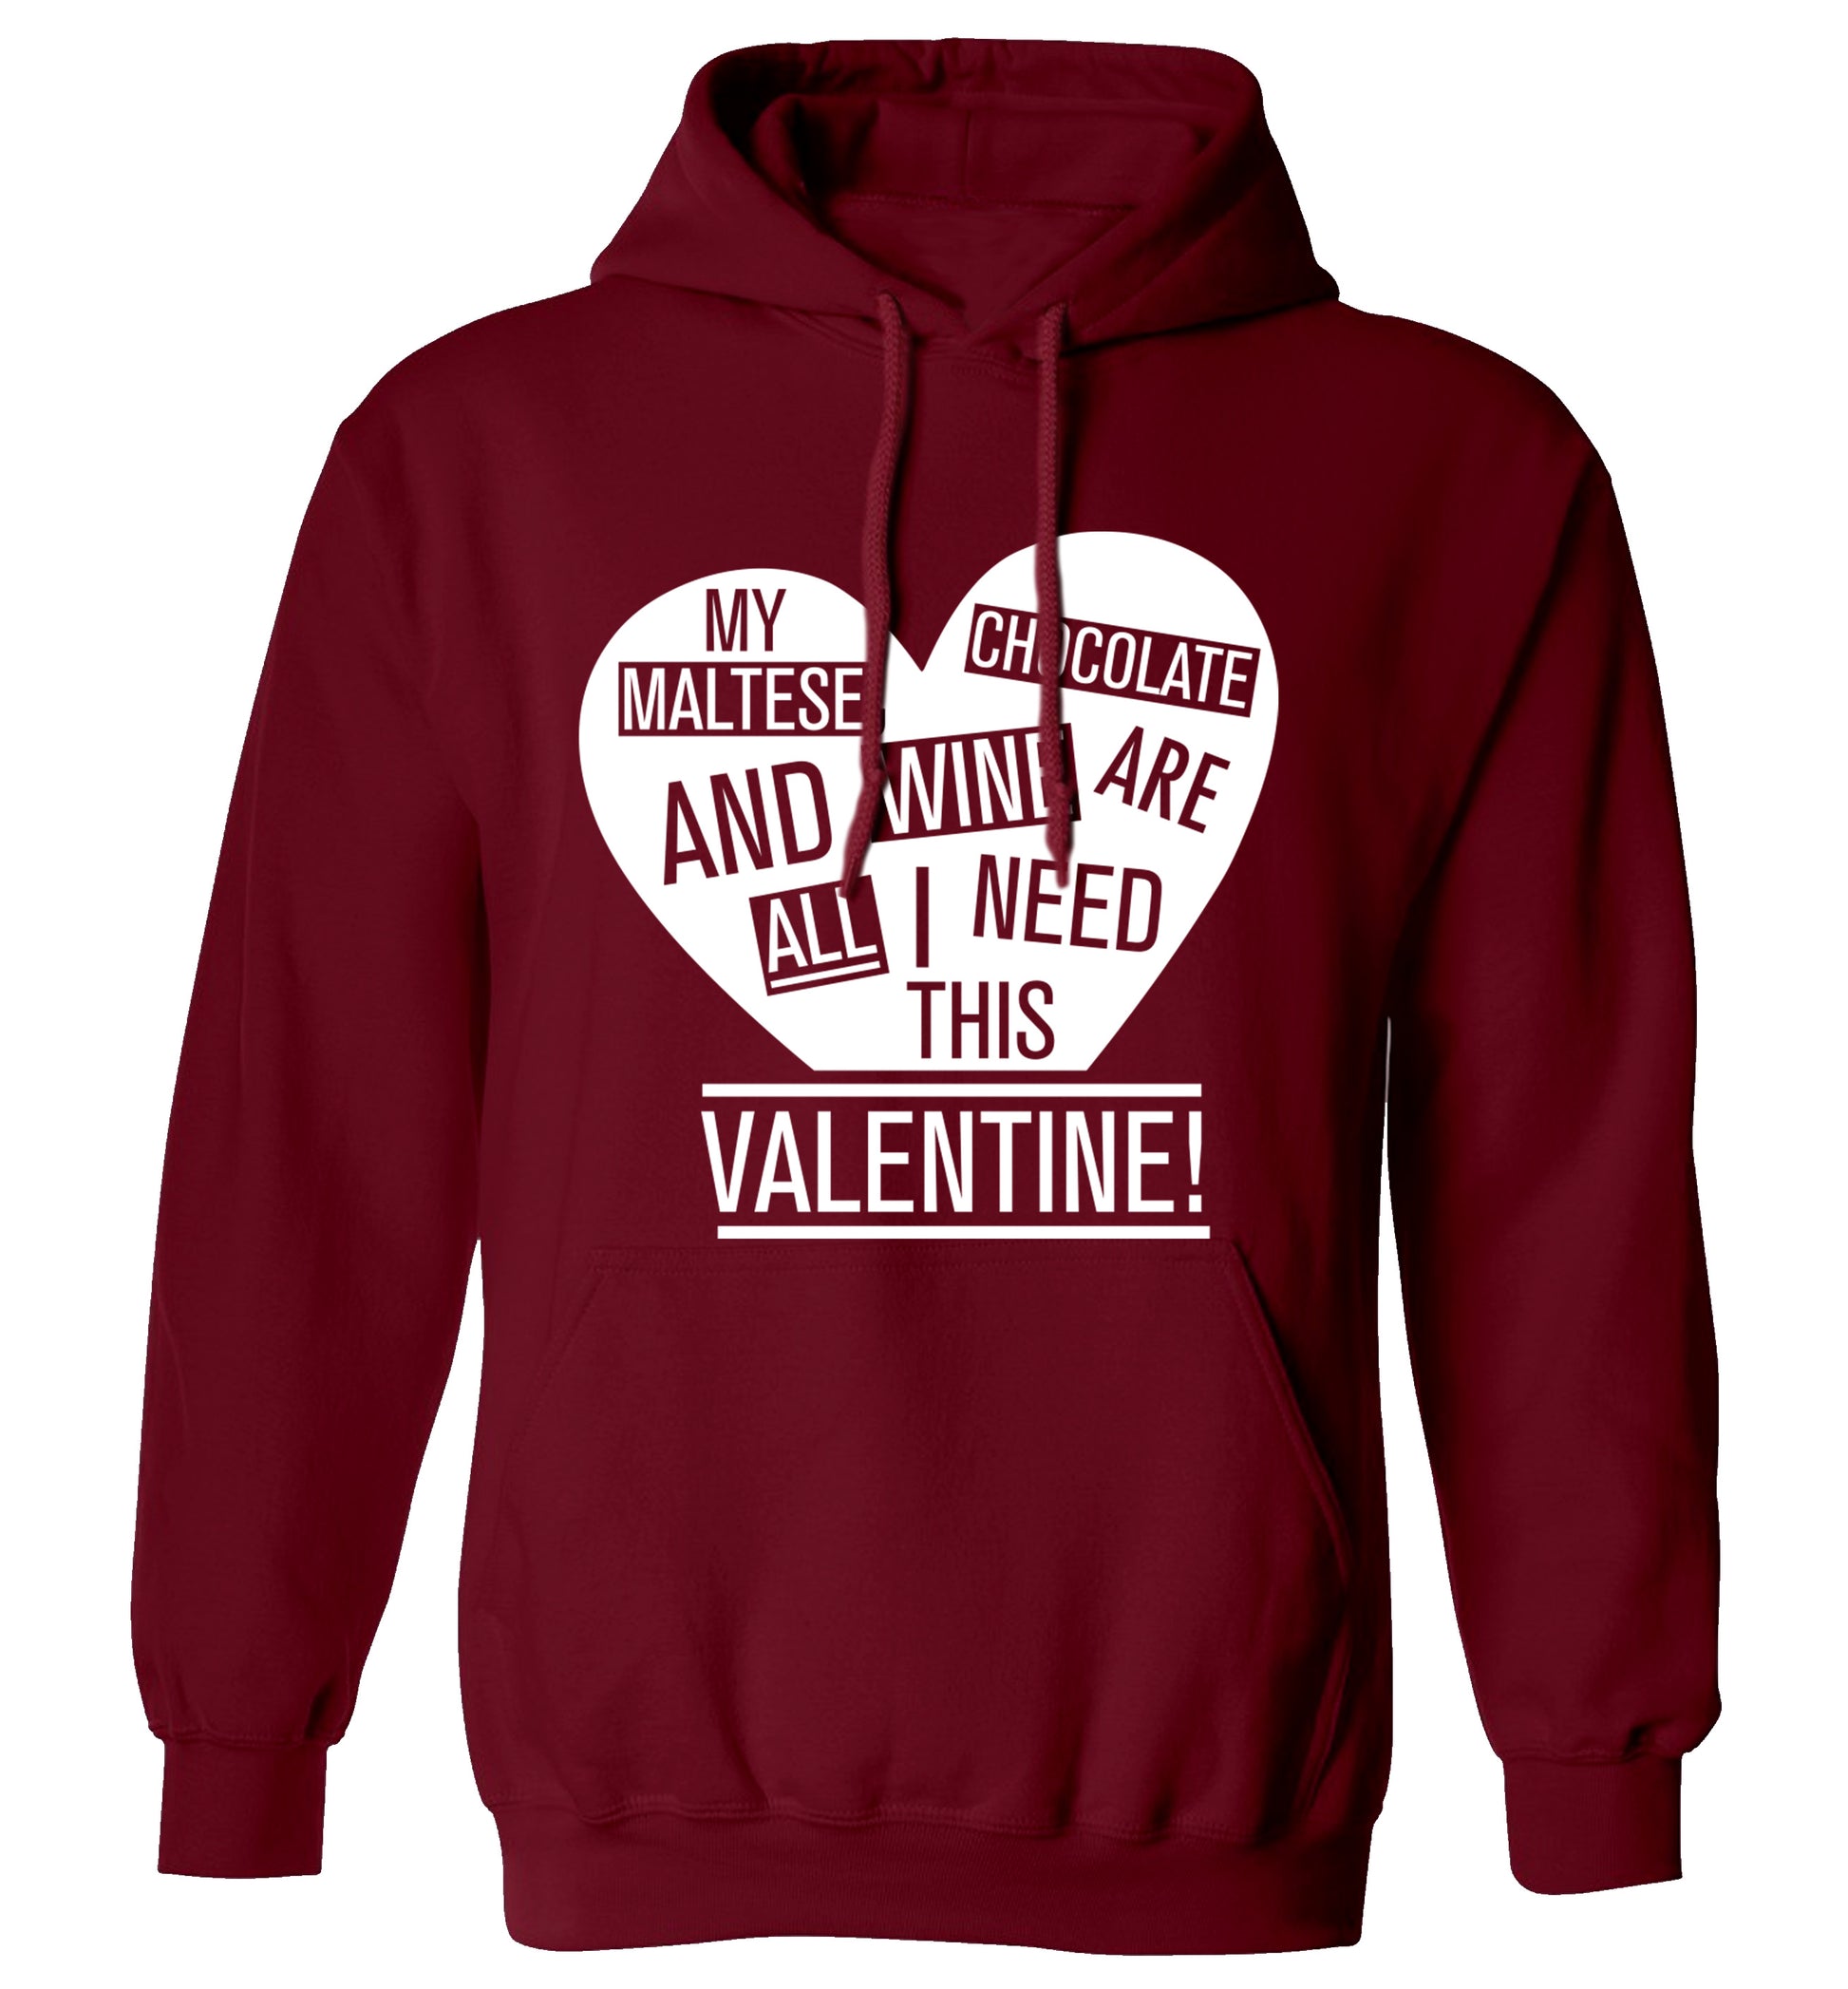 My maltese, chocolate and wine are all I need this valentine! adults unisex maroon hoodie 2XL